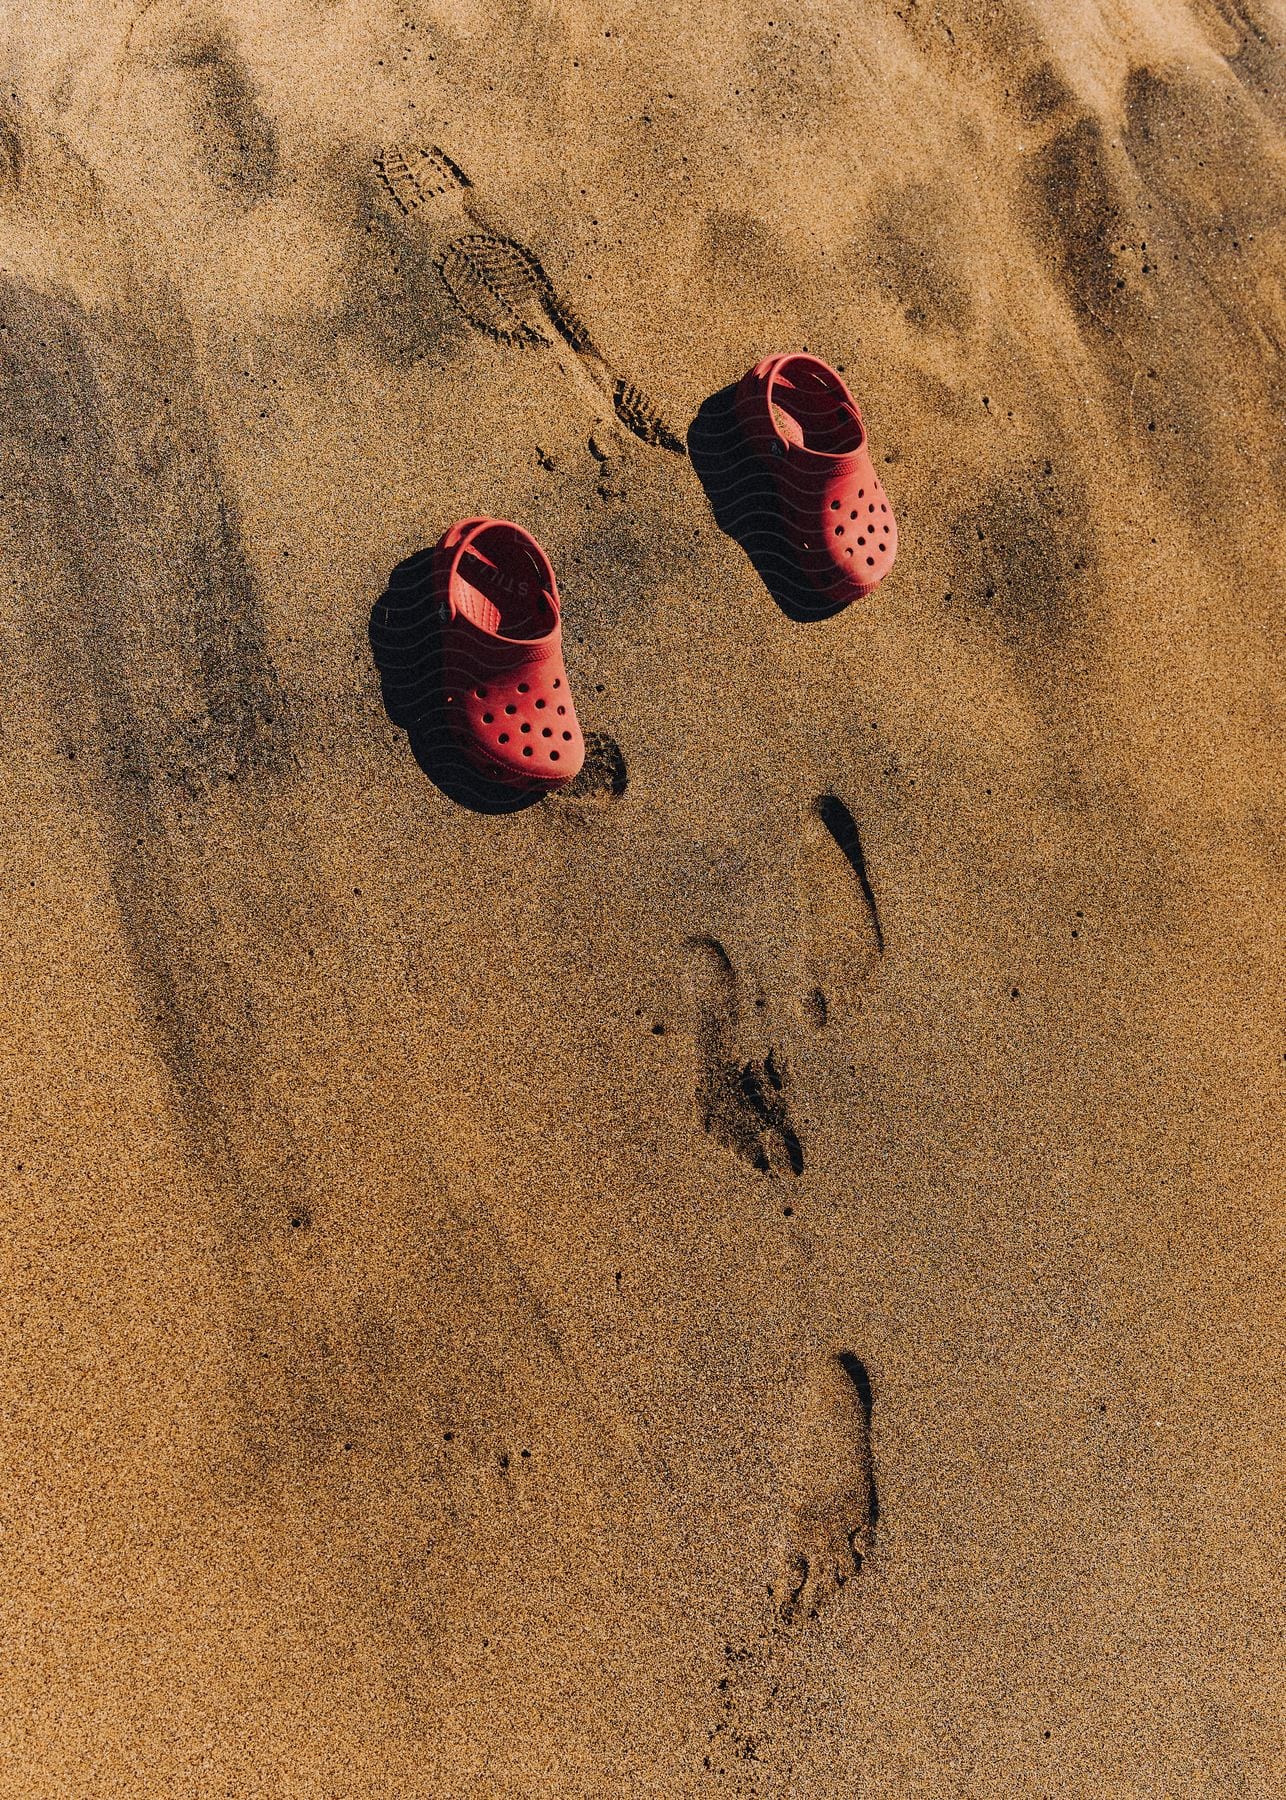 A clip of a pair of red slippers on the beach sand